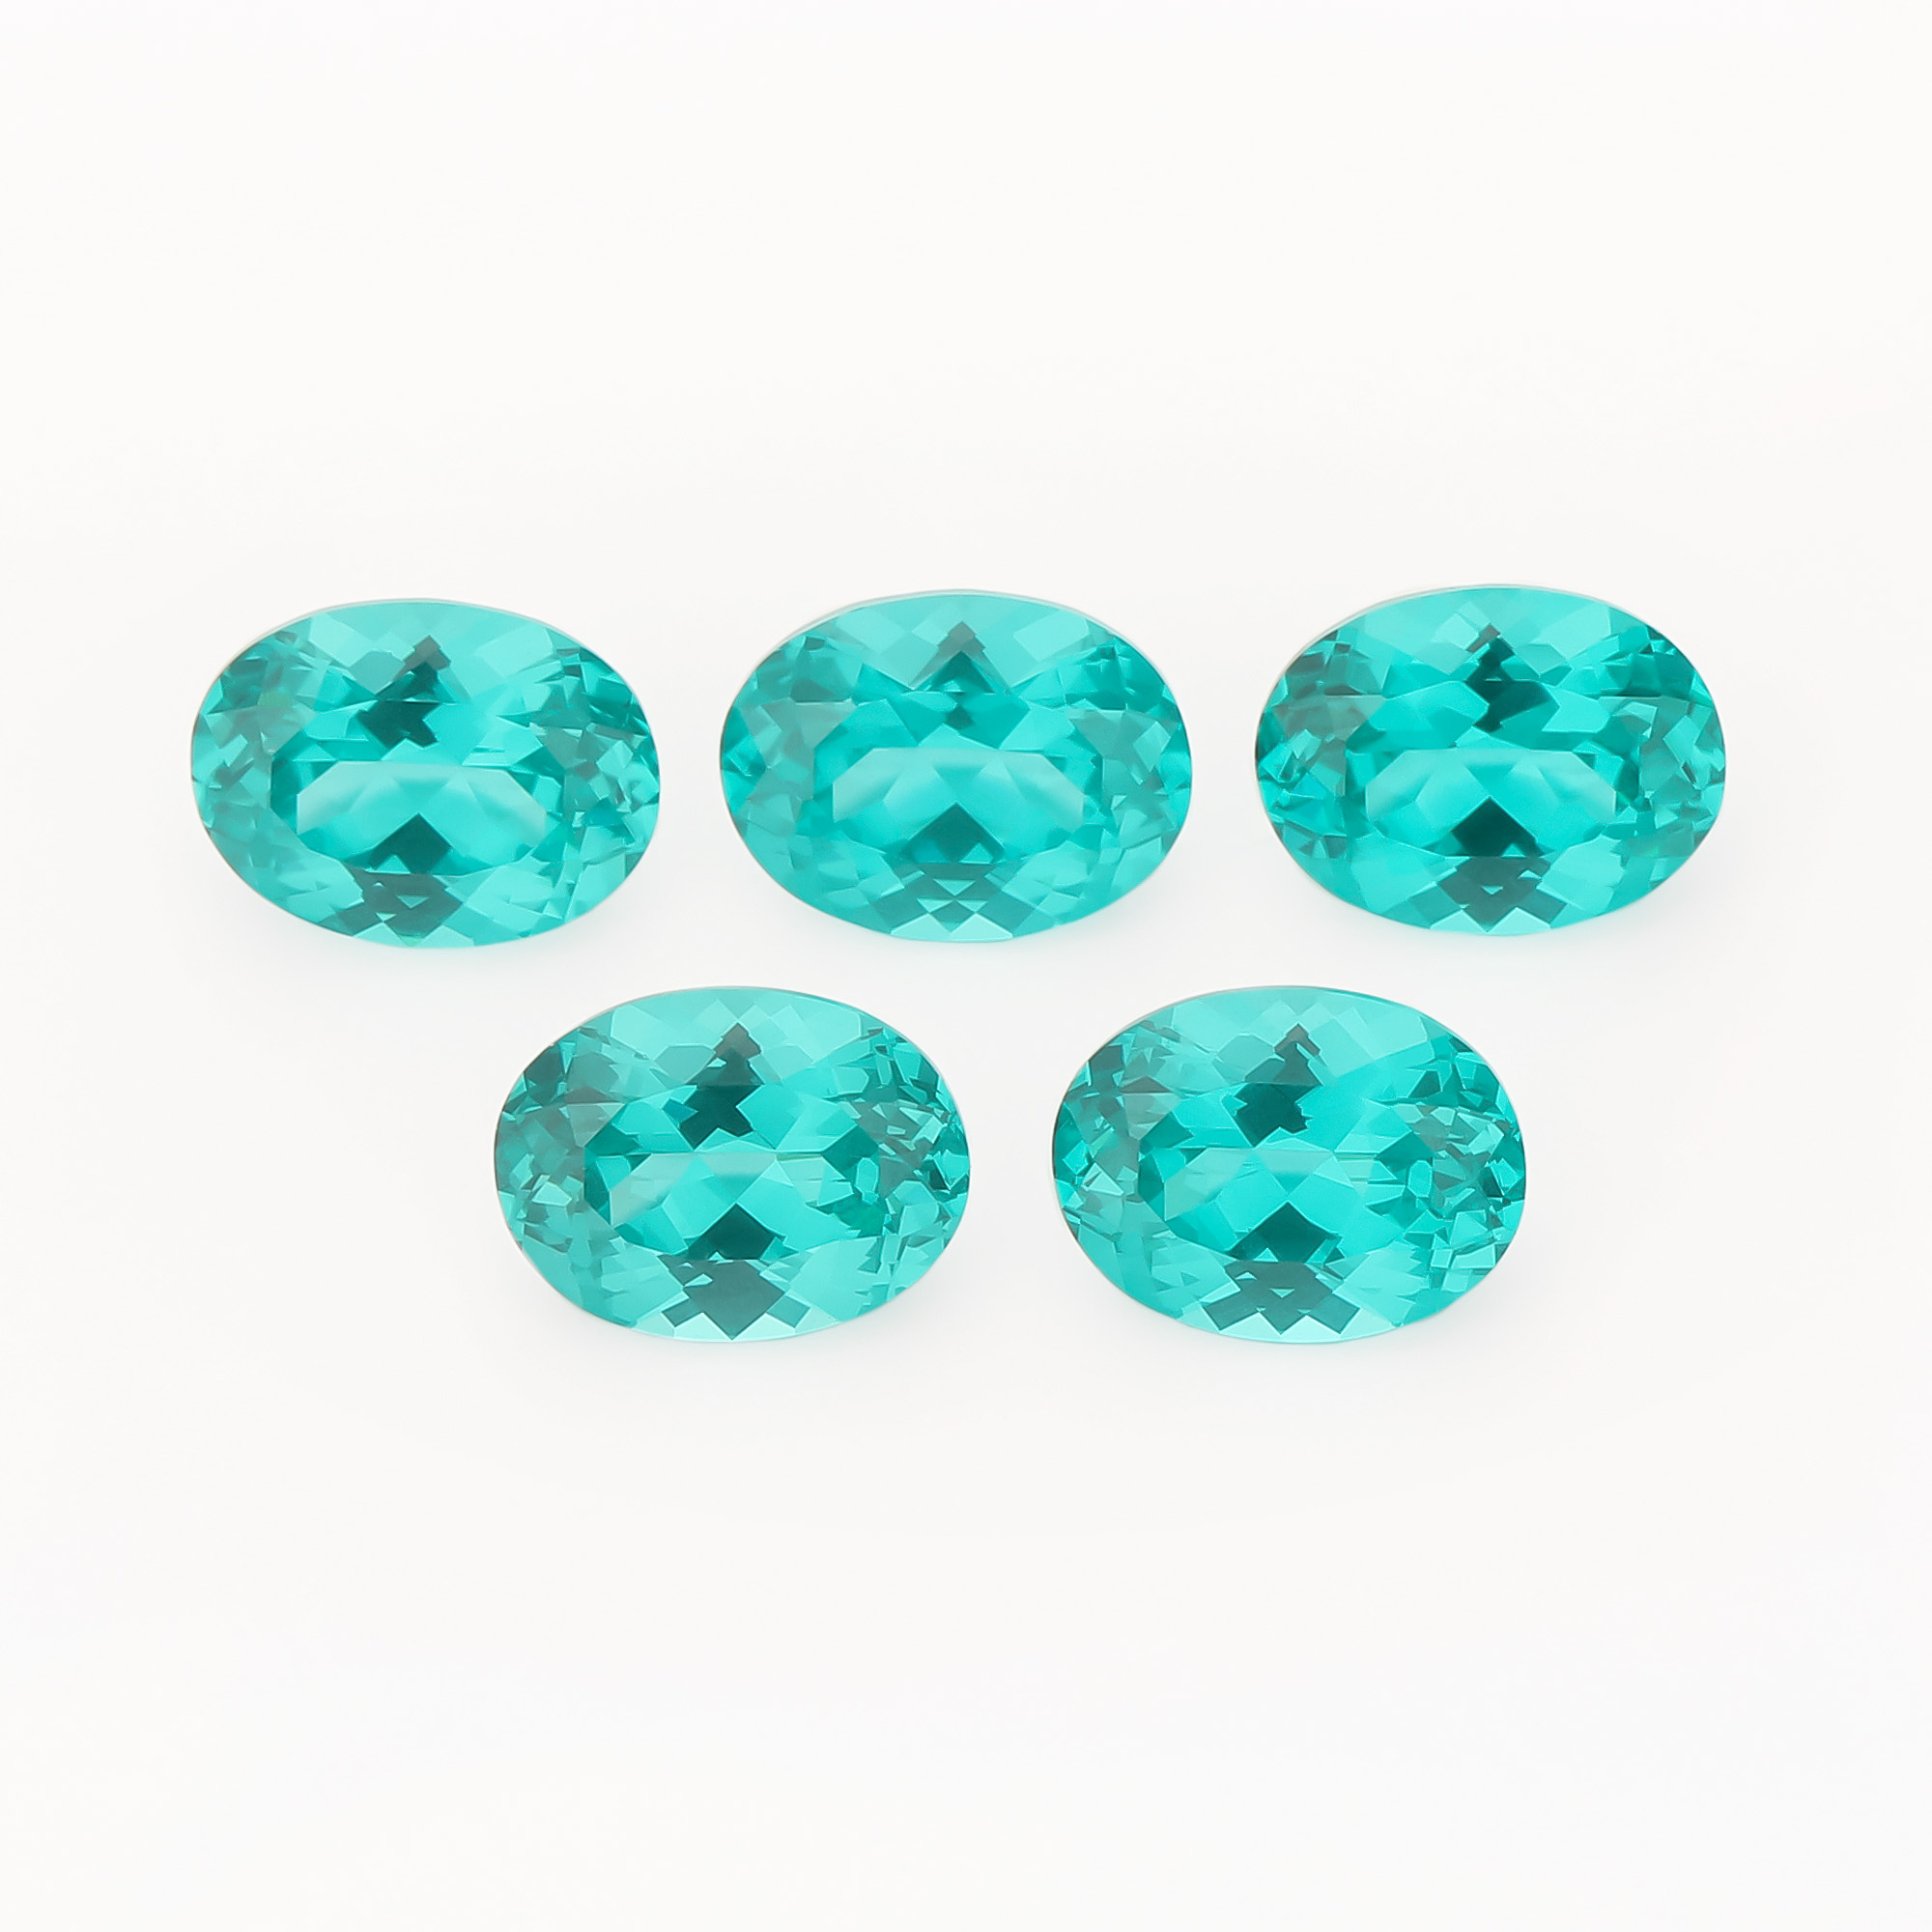 1Pcs 6x8MM Simulated Paraíba Oval Faceted Stone,Green Blue Stone,Unique Gemstone,Loose Stone,DIY Jewelry Supplies 4120146 - Click Image to Close